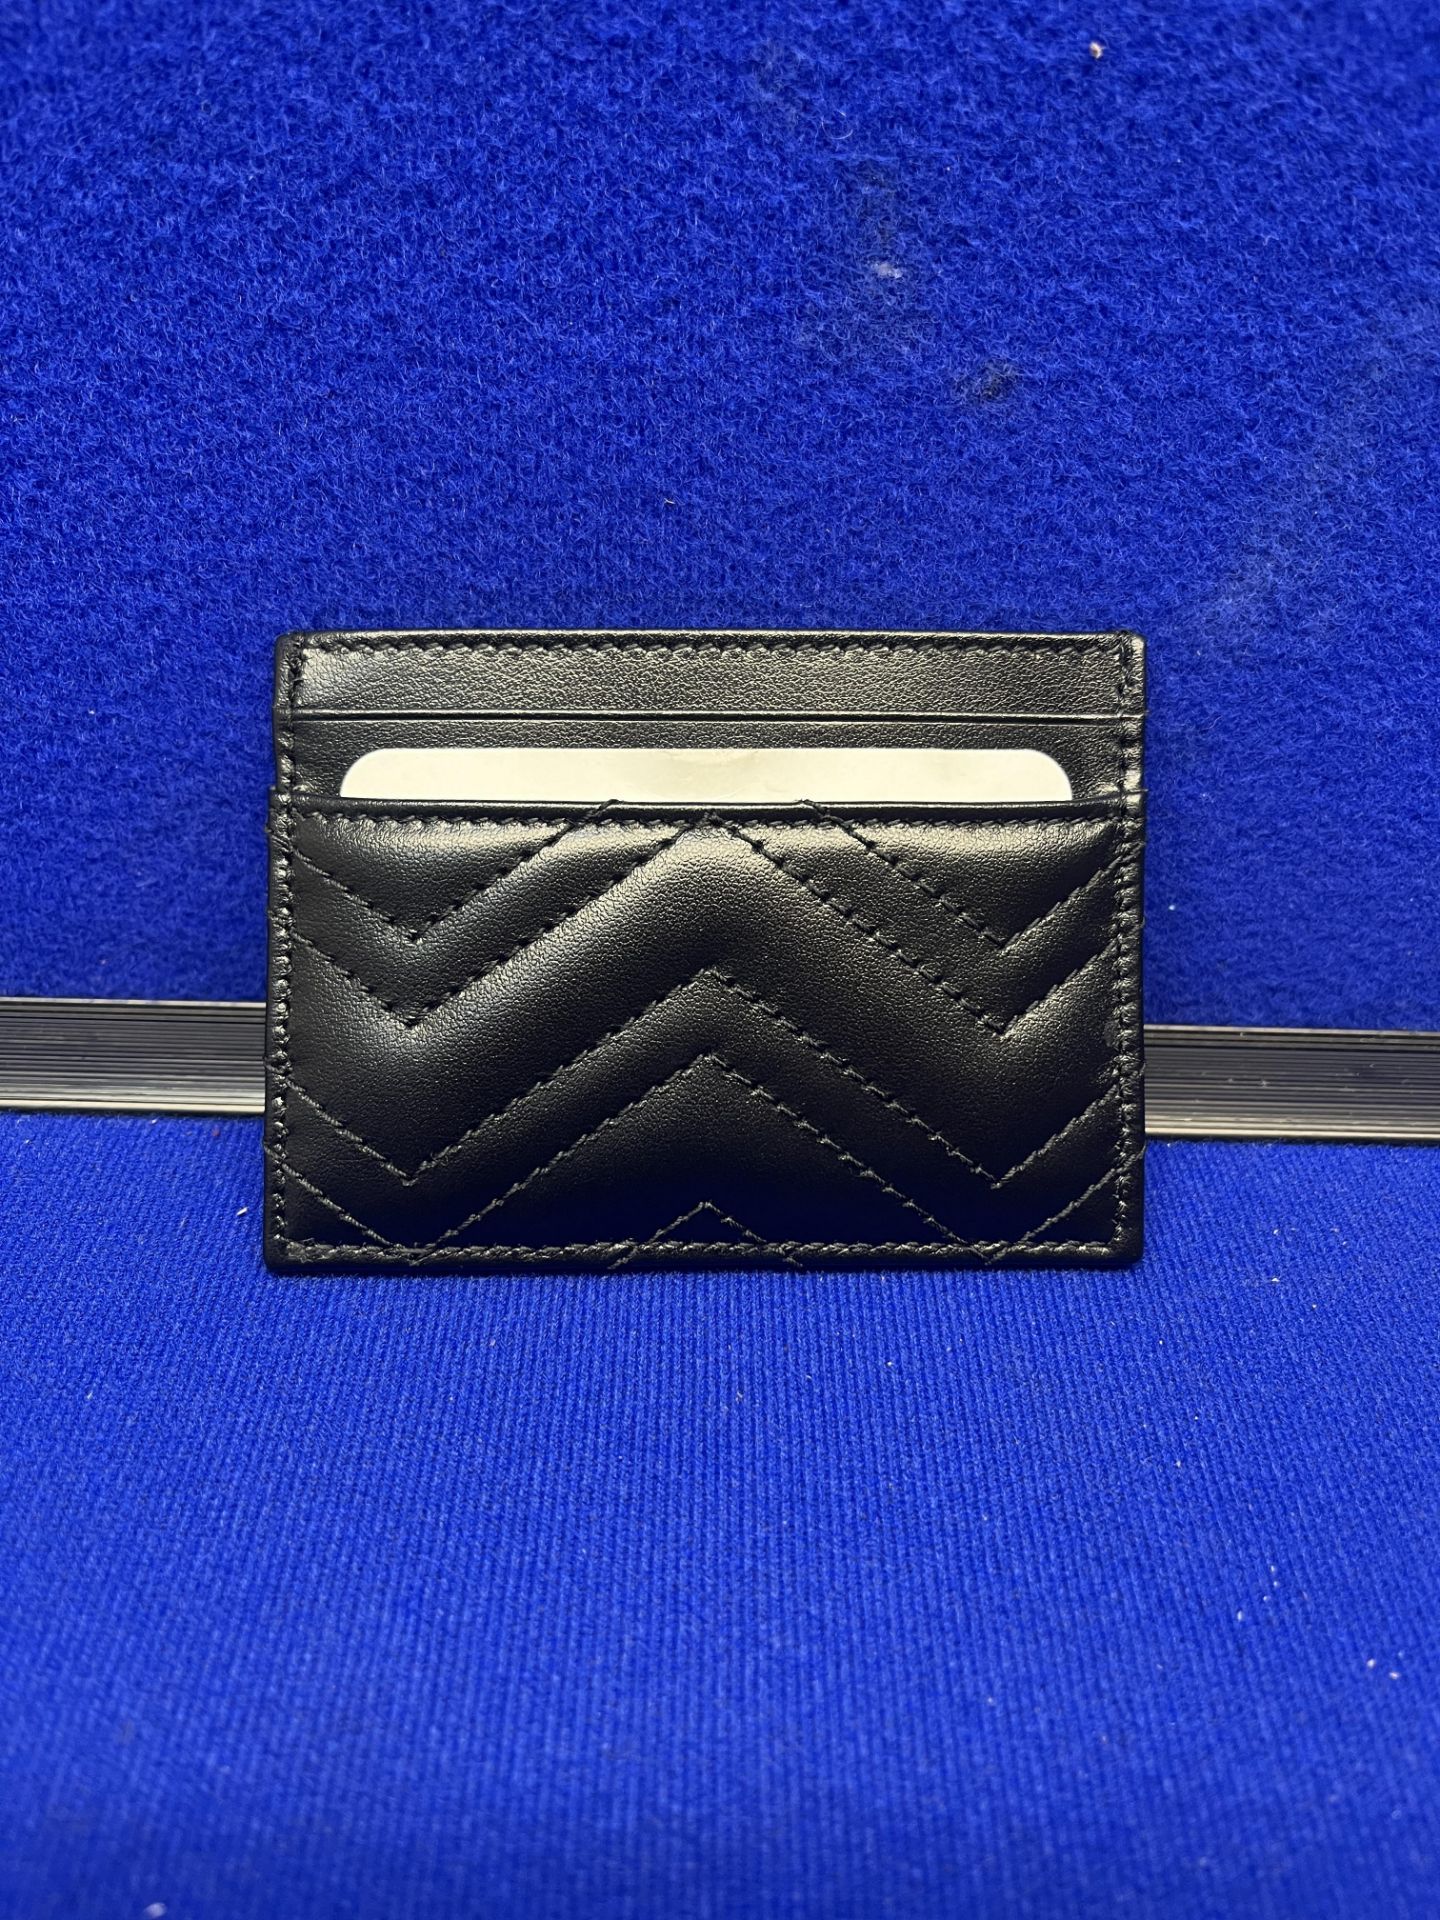 Gucci Double G Black Leather Card Holder - Image 2 of 4